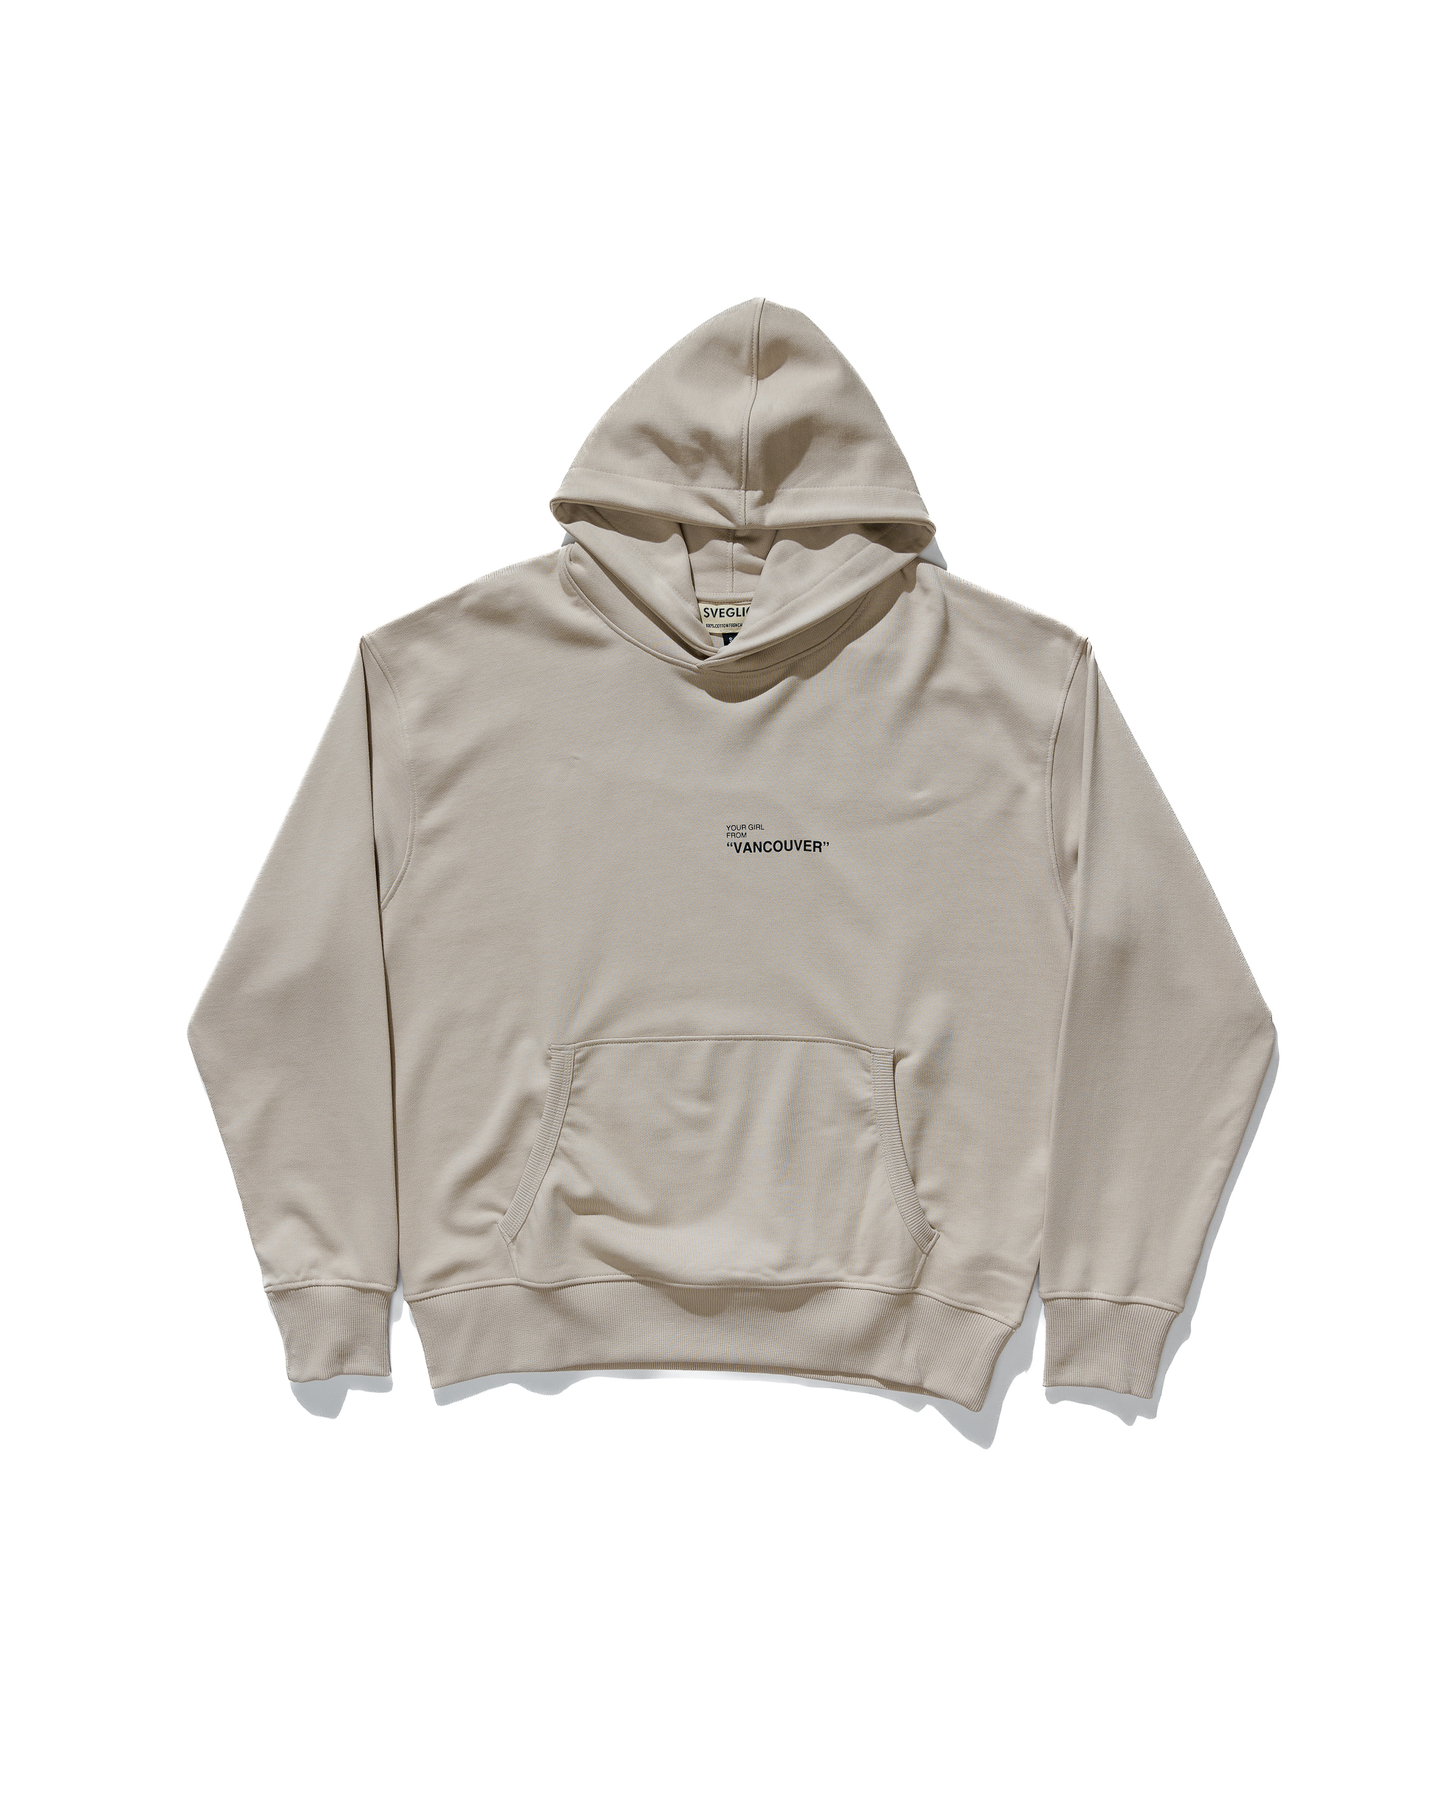 Your Girl from Vancouver Hoodie- Stone Beige